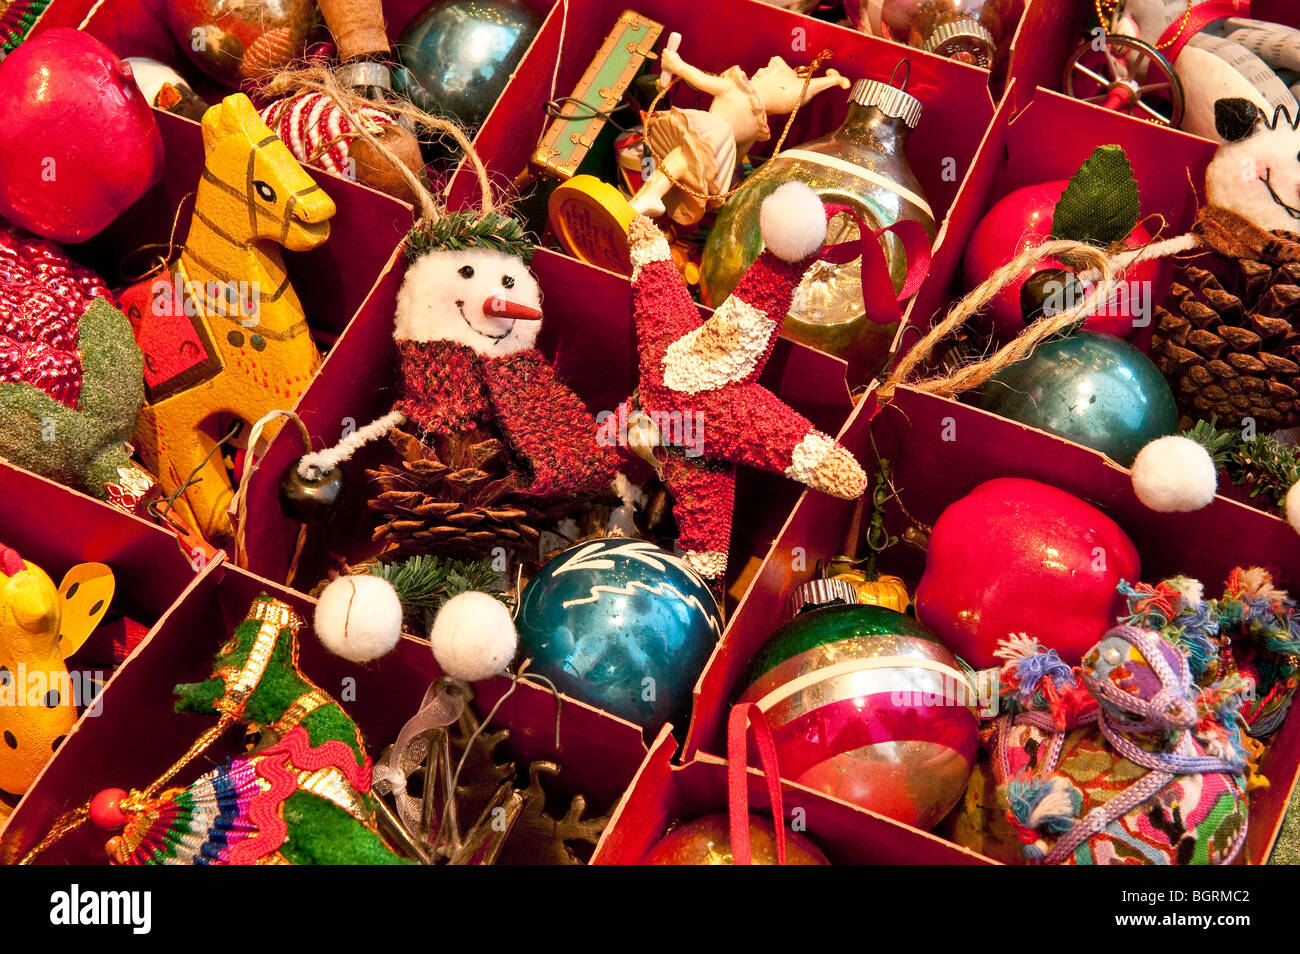 Christmas tree ornaments and decorations. Stock Photo